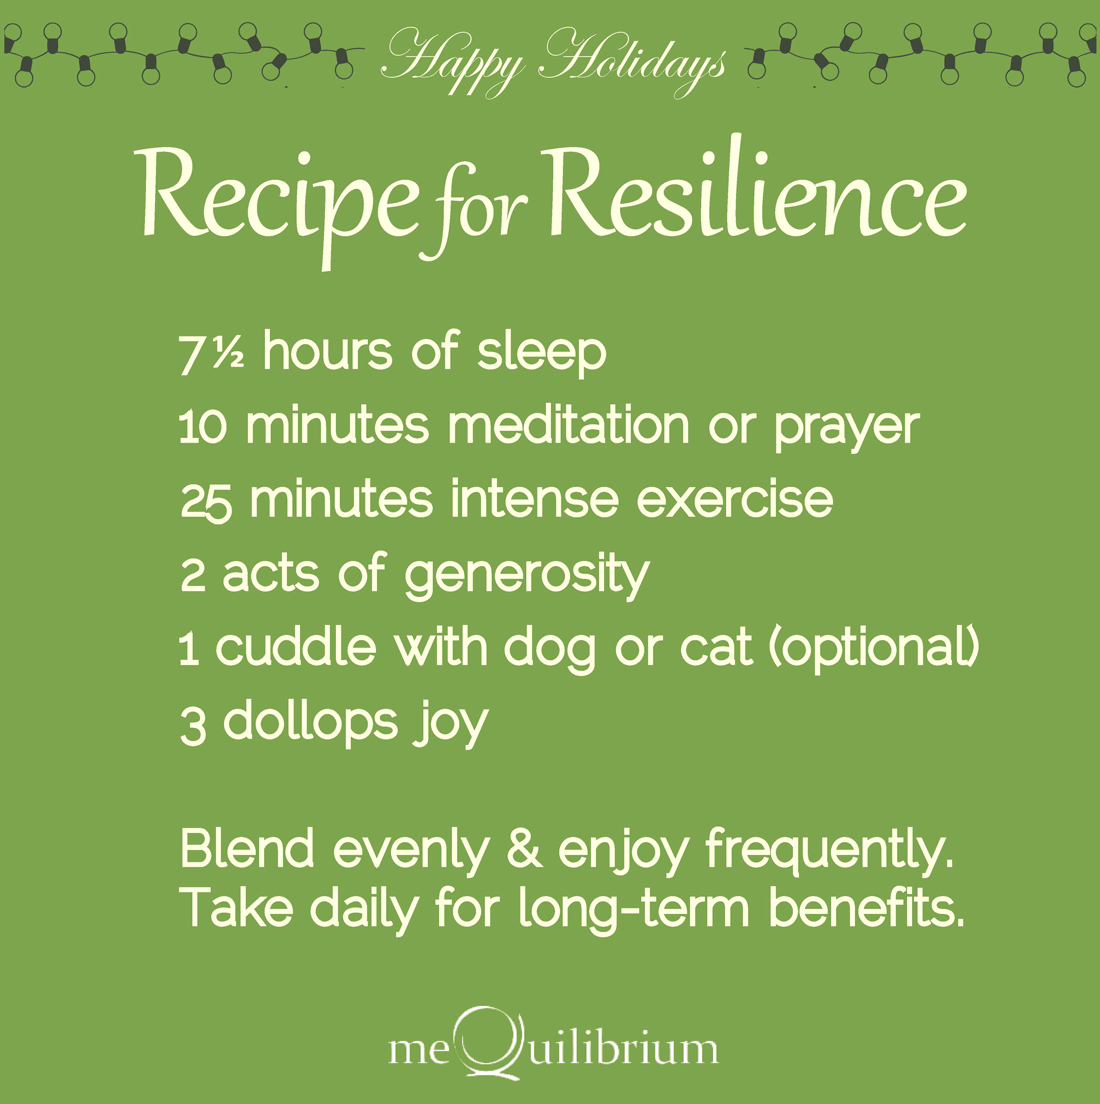 You’re Invited! A meQuilibrium Holiday Stress Relief Recipe Swap